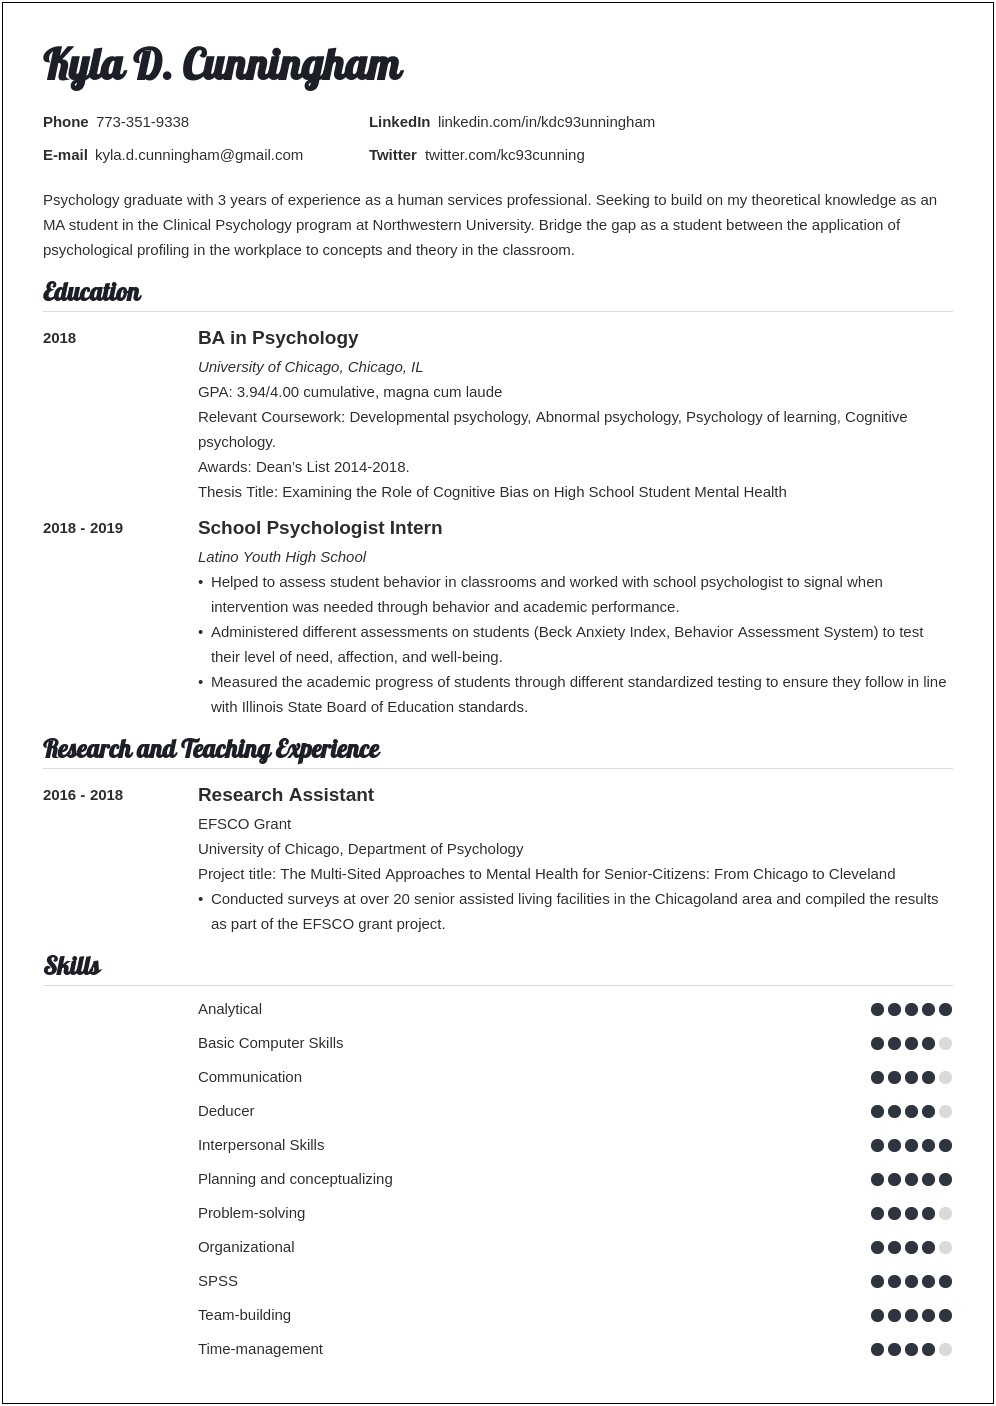 Resume Objective Statement For Recent College Graduate